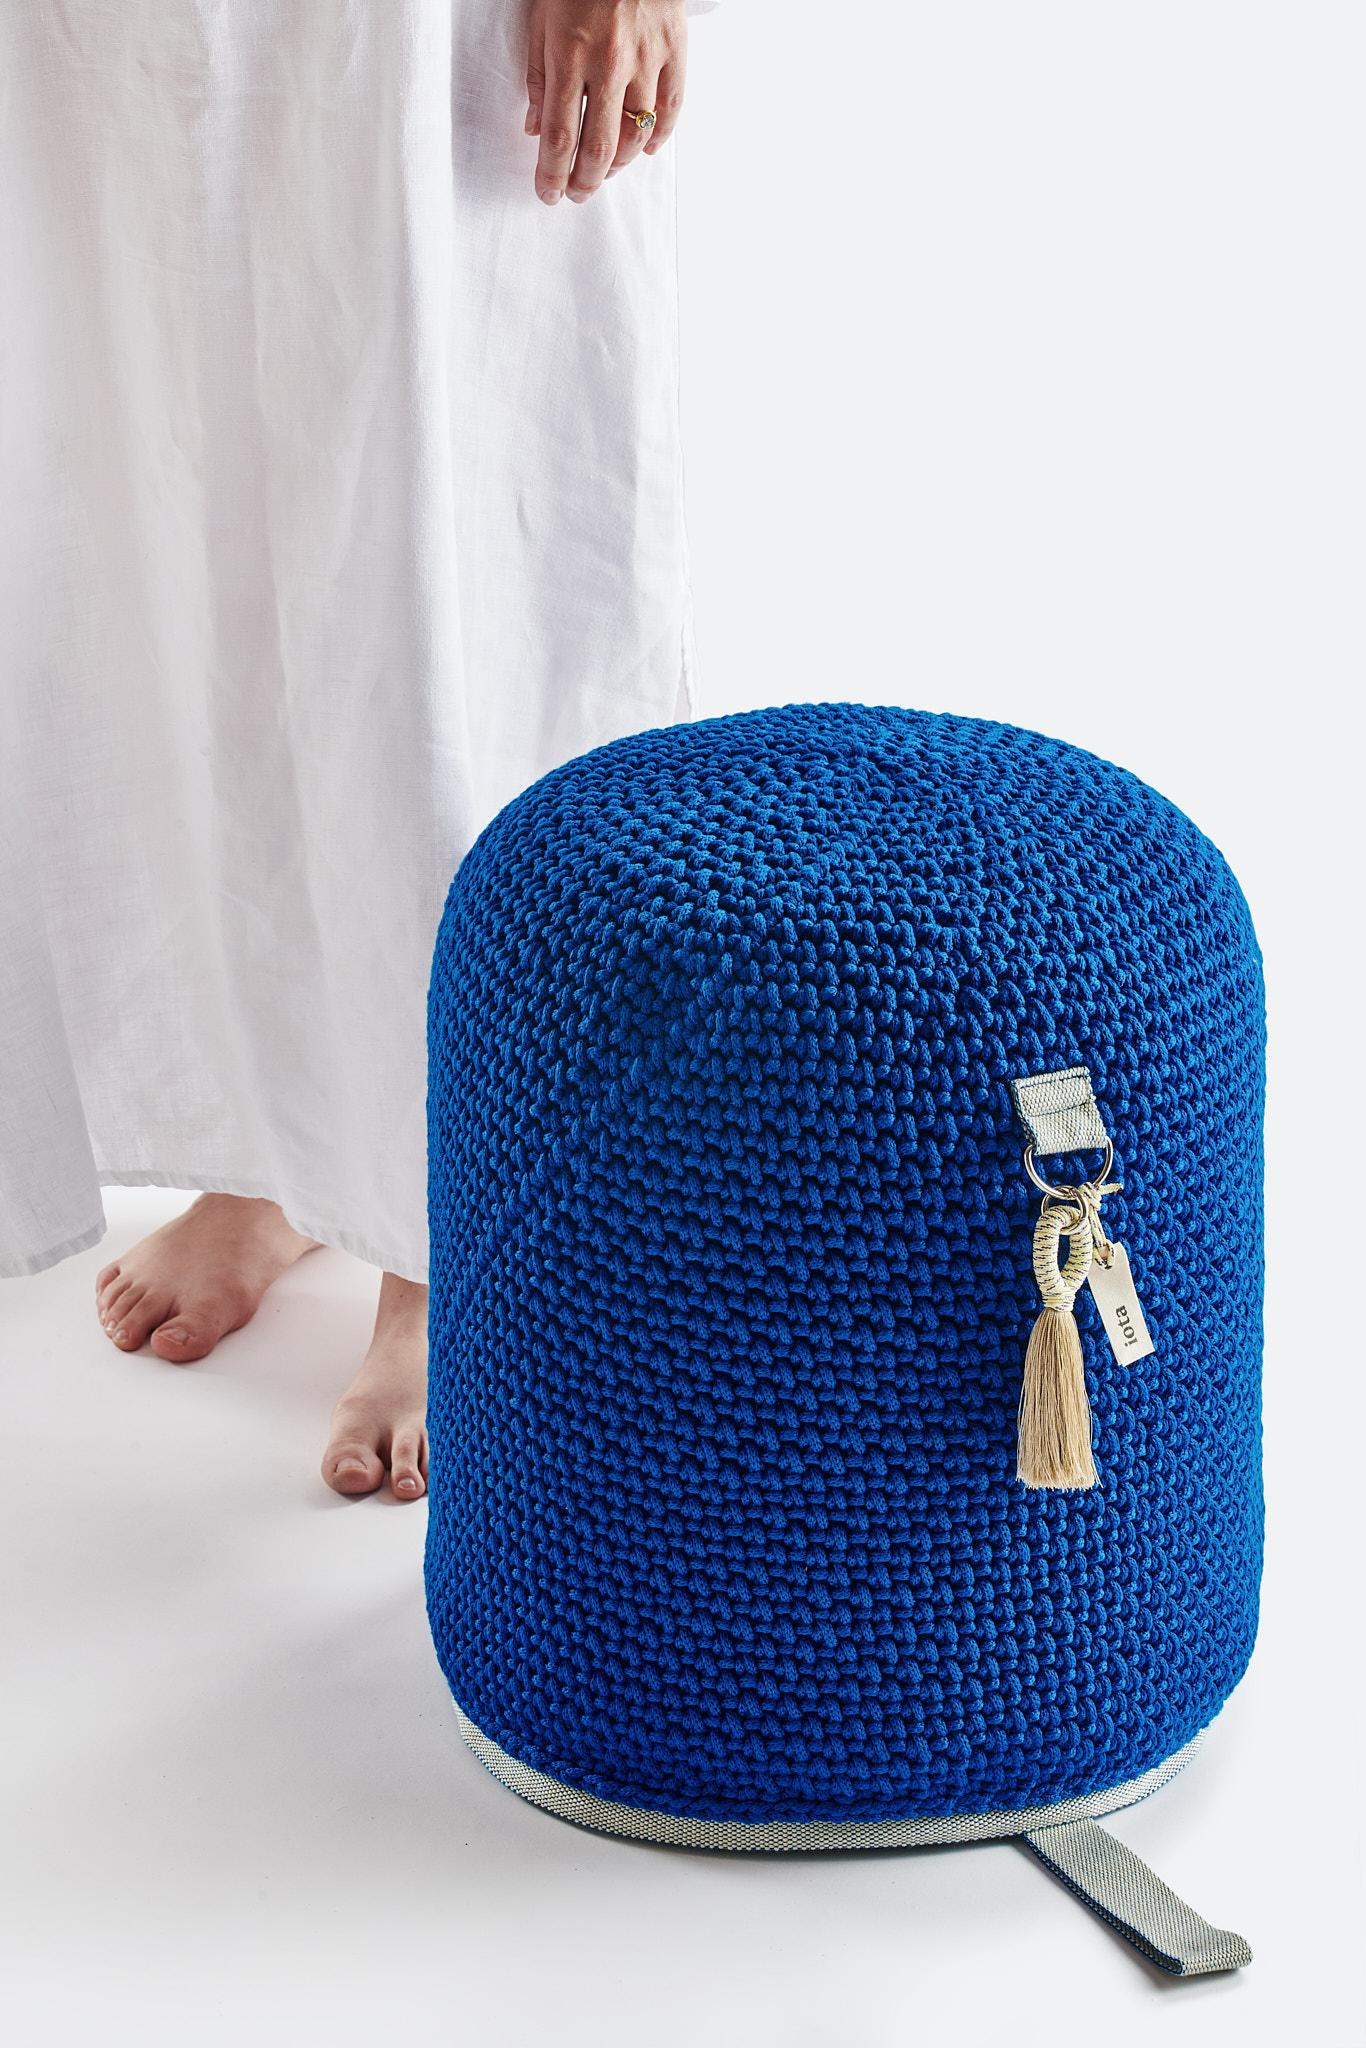 A single seat pouf, compact, bright and cheeky. Perfect as an additional seat or as a footstool, this pouf is 100% handmade from UV protected acrylic. Use it indoors or carry it outdoors and use it on your balcony or terrace.

In addition to being